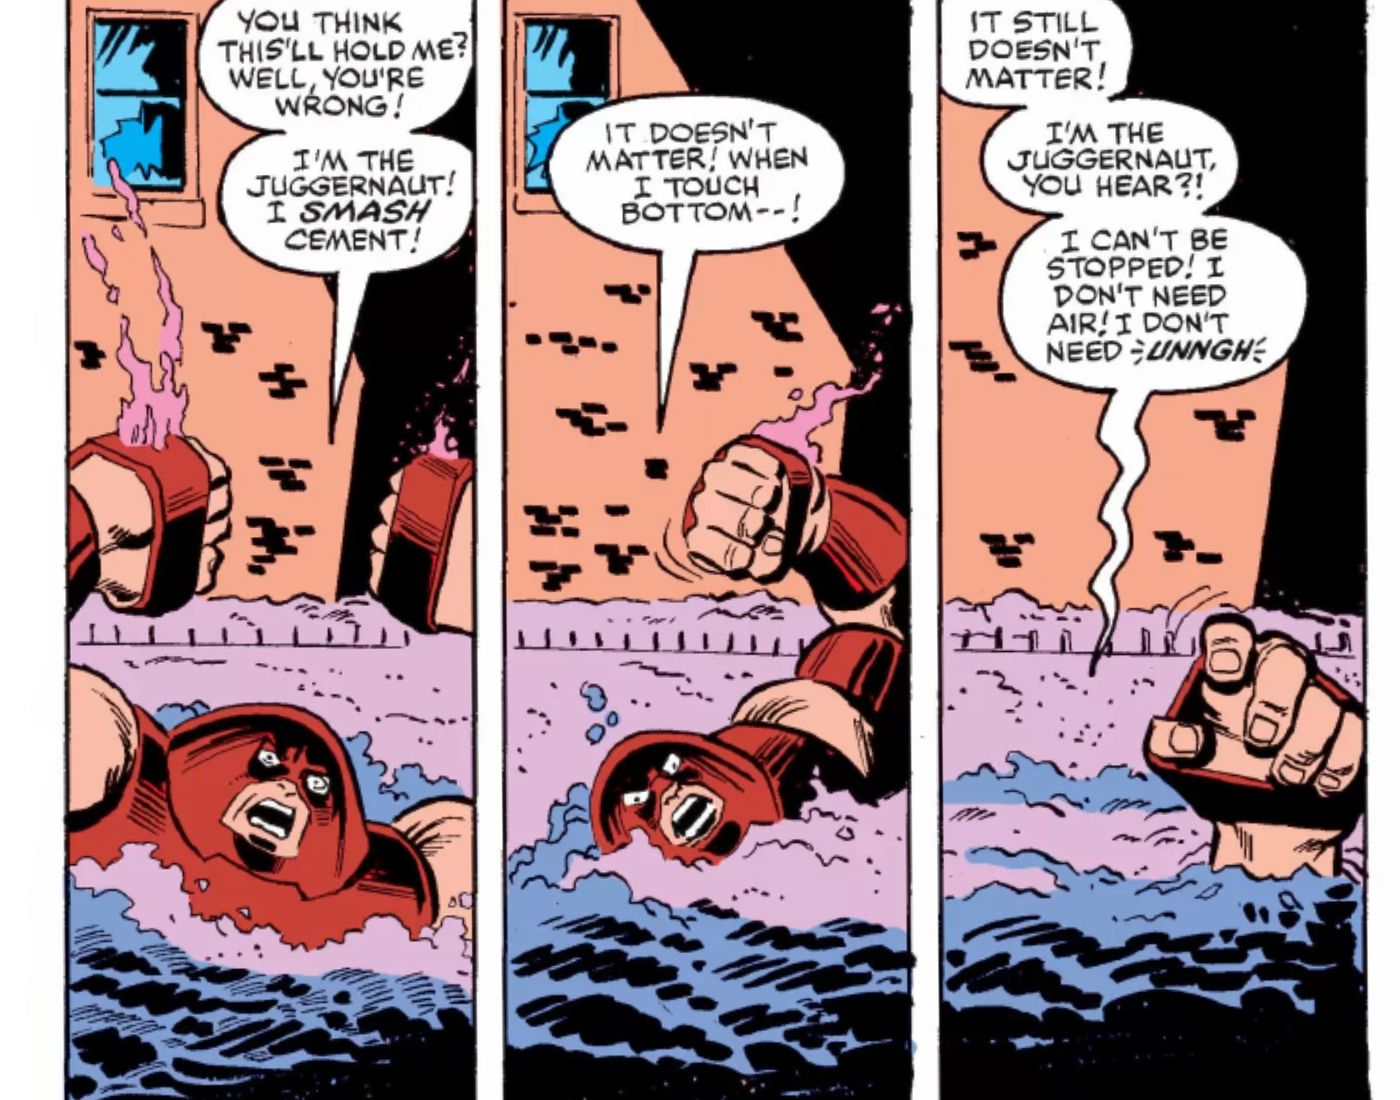 Juggernaut sinks into a pool of cement in Amazing Spider-Man #230